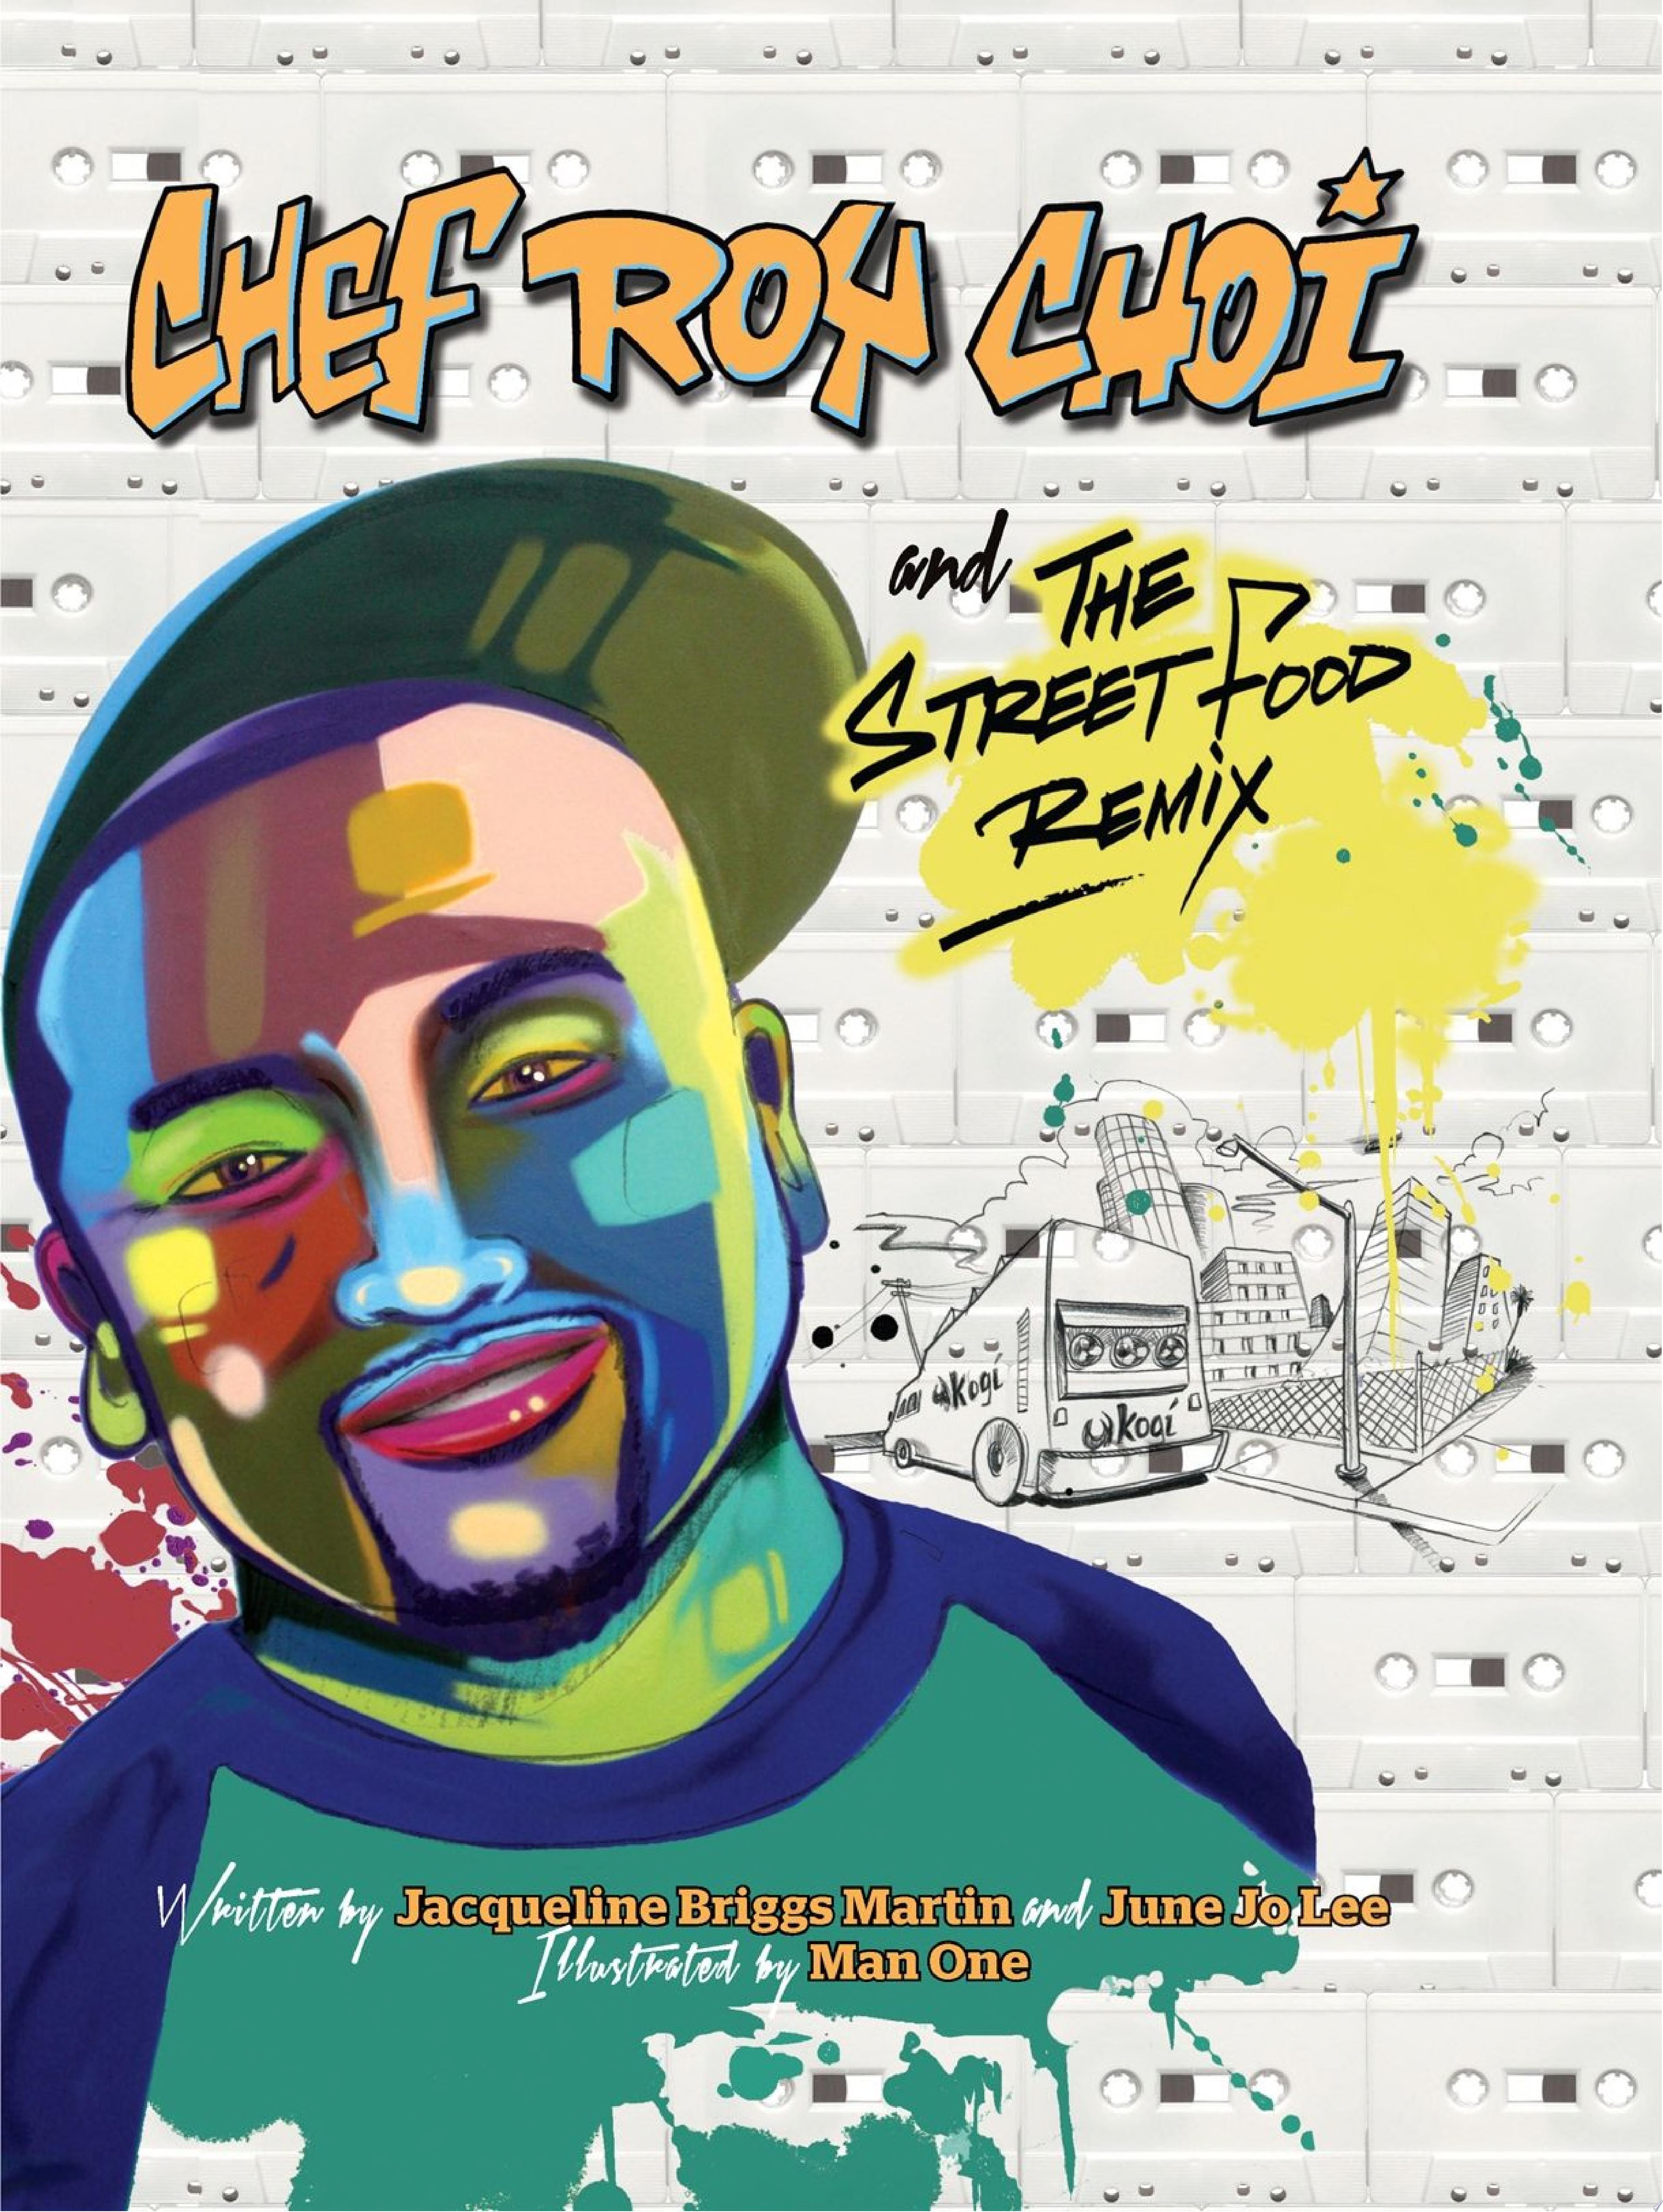 Image for "Chef Roy Choi and the Street Food Remix"